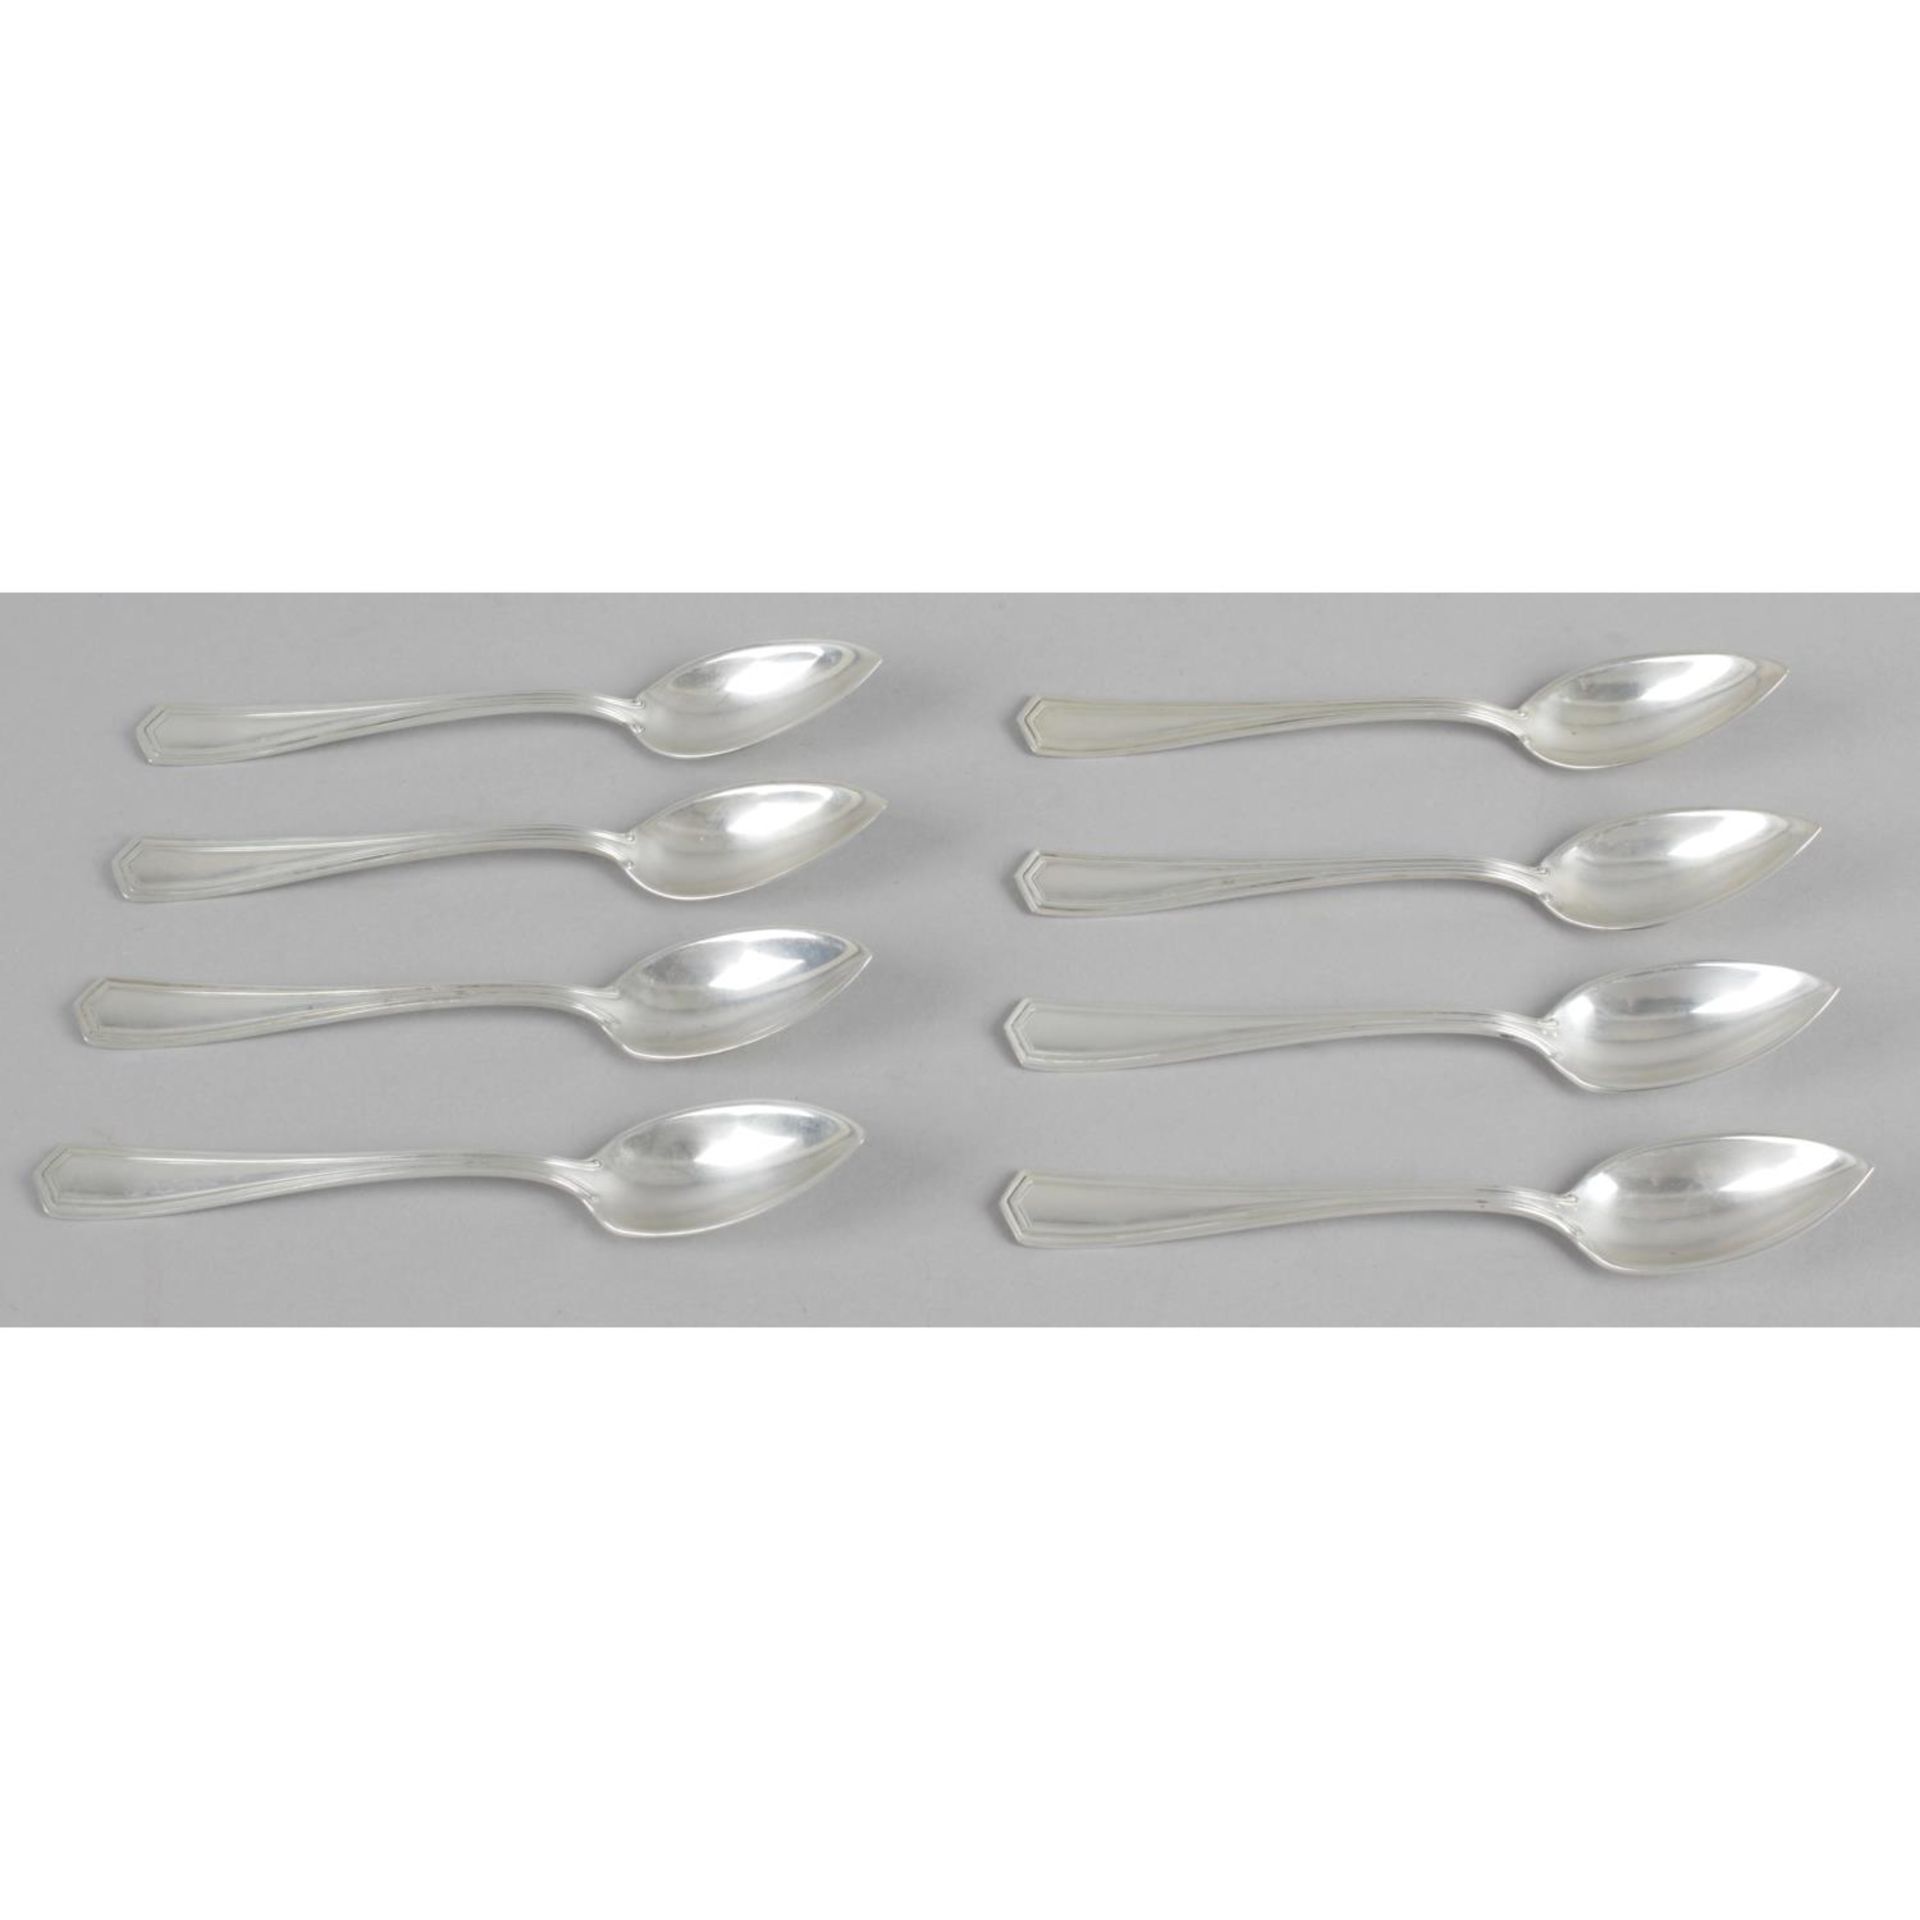 A set of eight American silver grapefruit spoons, with the bowl leading to a pointed tip.